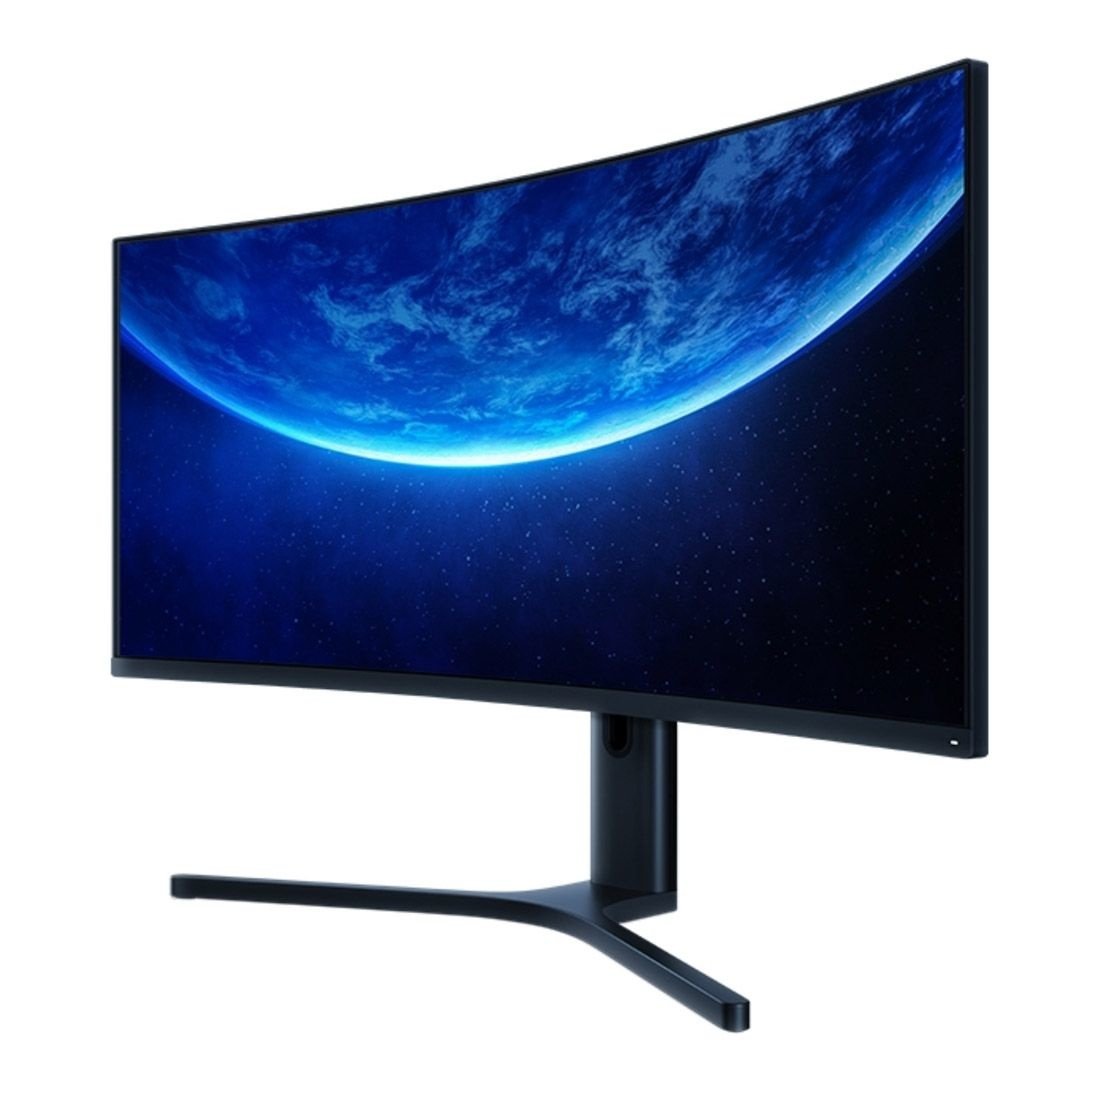 XiaomiProducts | Xiaomi Curved Monitor inch - XiaomiProducts